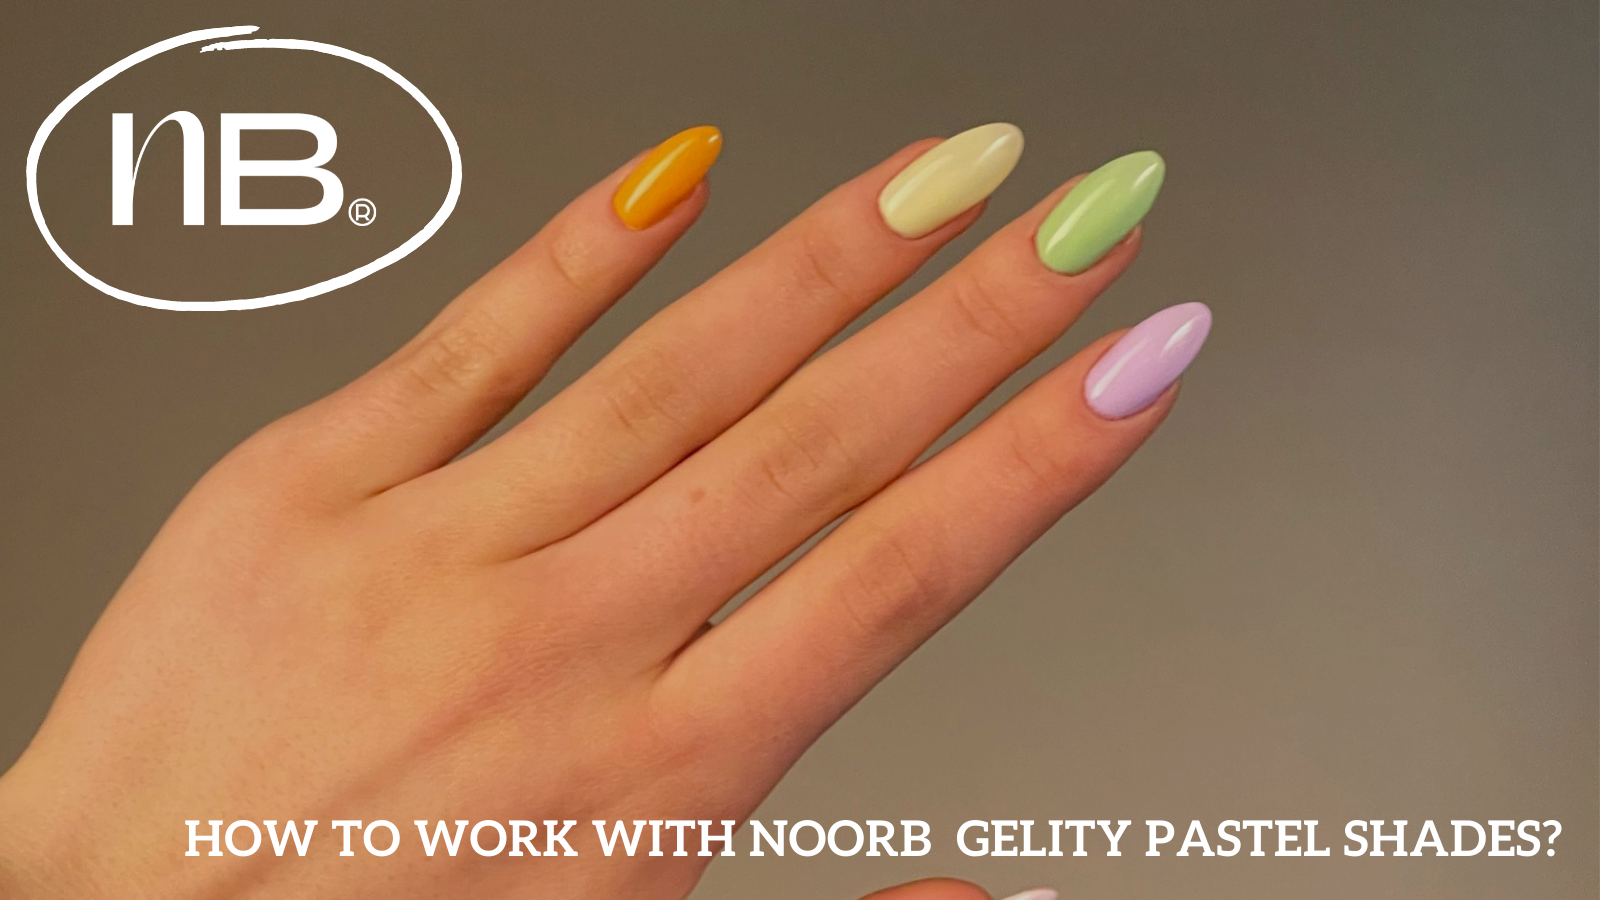 How to work with noorb gelity pastel shades?